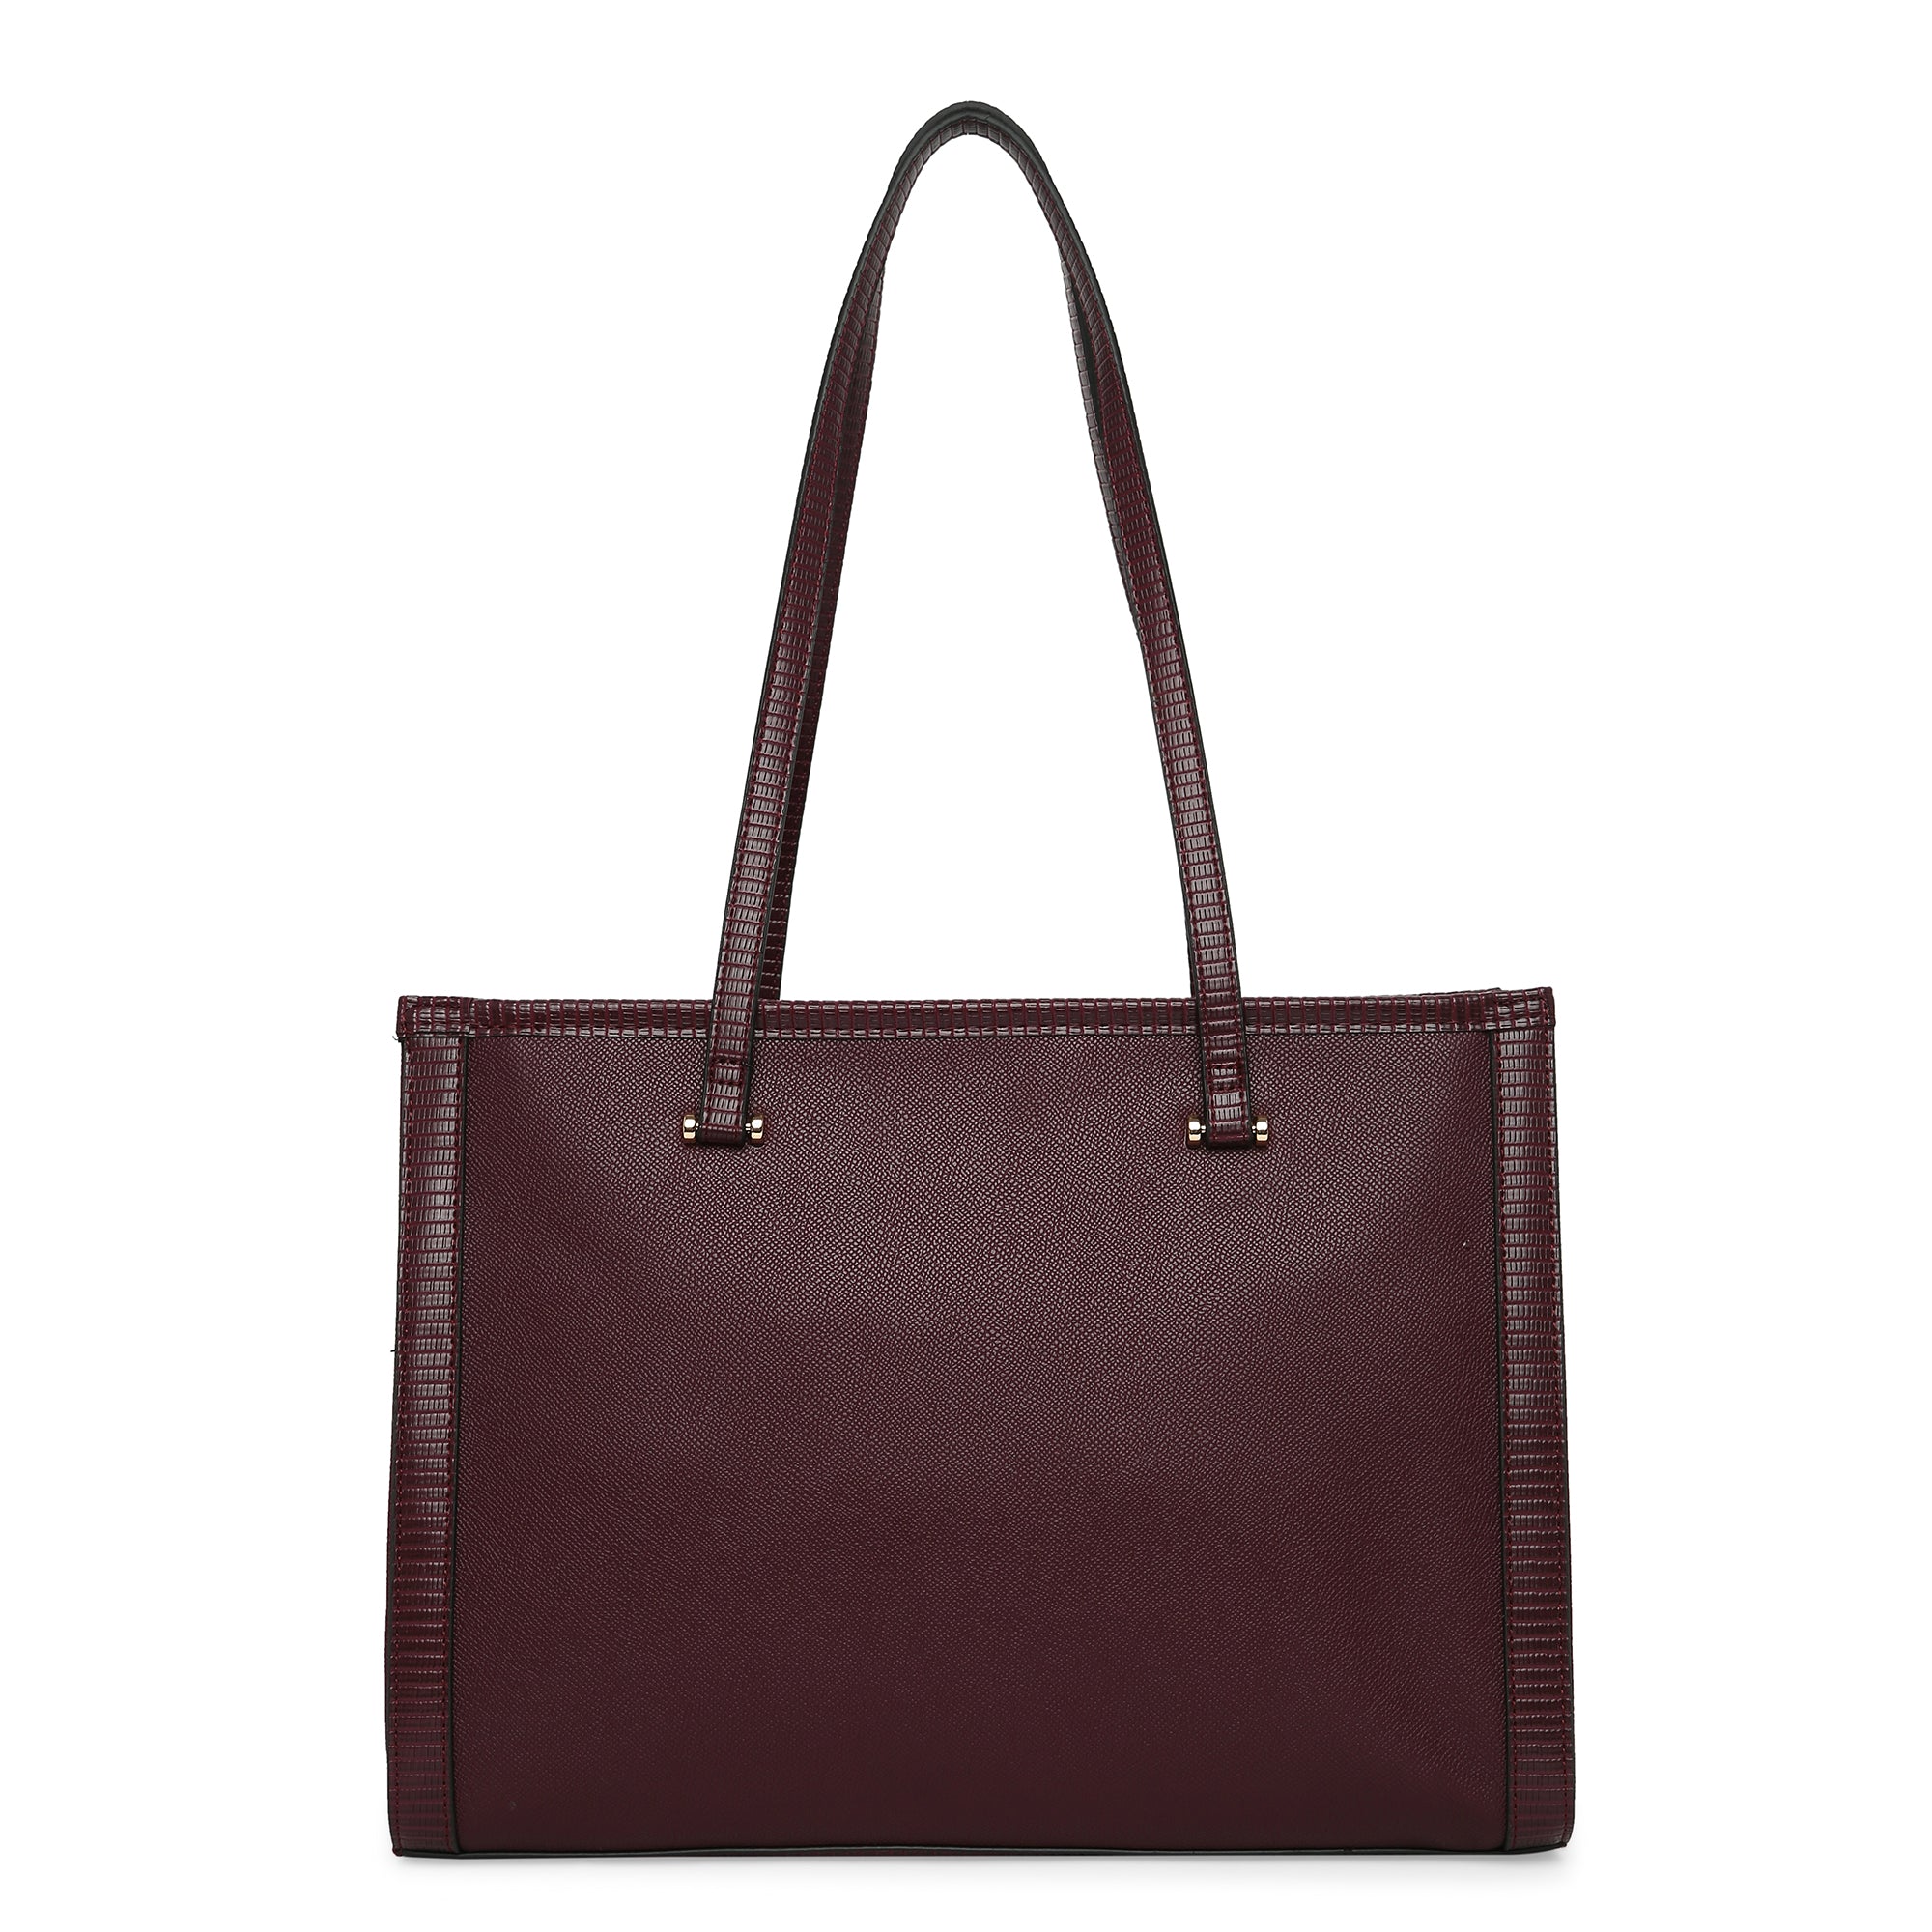 Accessorize London Women's Faux Leather Maroon Rosie Book Tote Bag